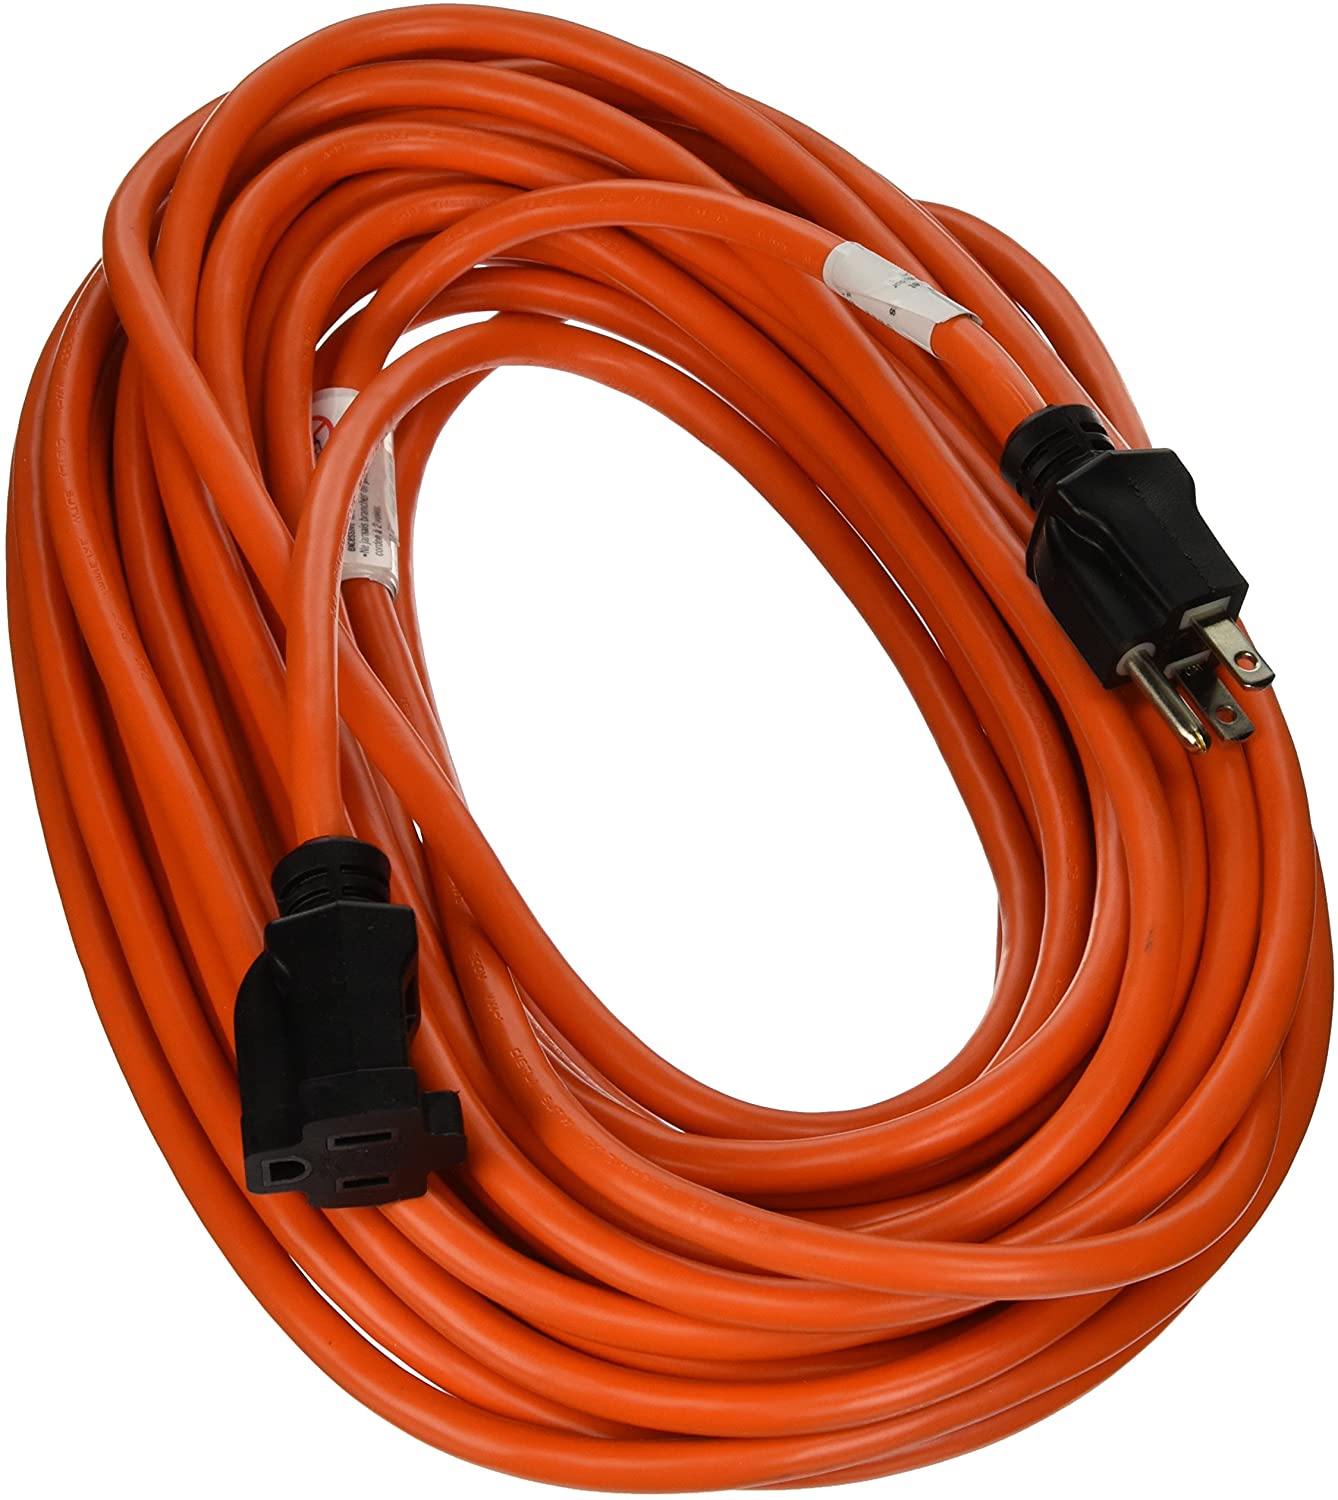 Prime Wire &amp; CAble | Extension
Cord 50 Ft Outdoor Orange
16/3AWG